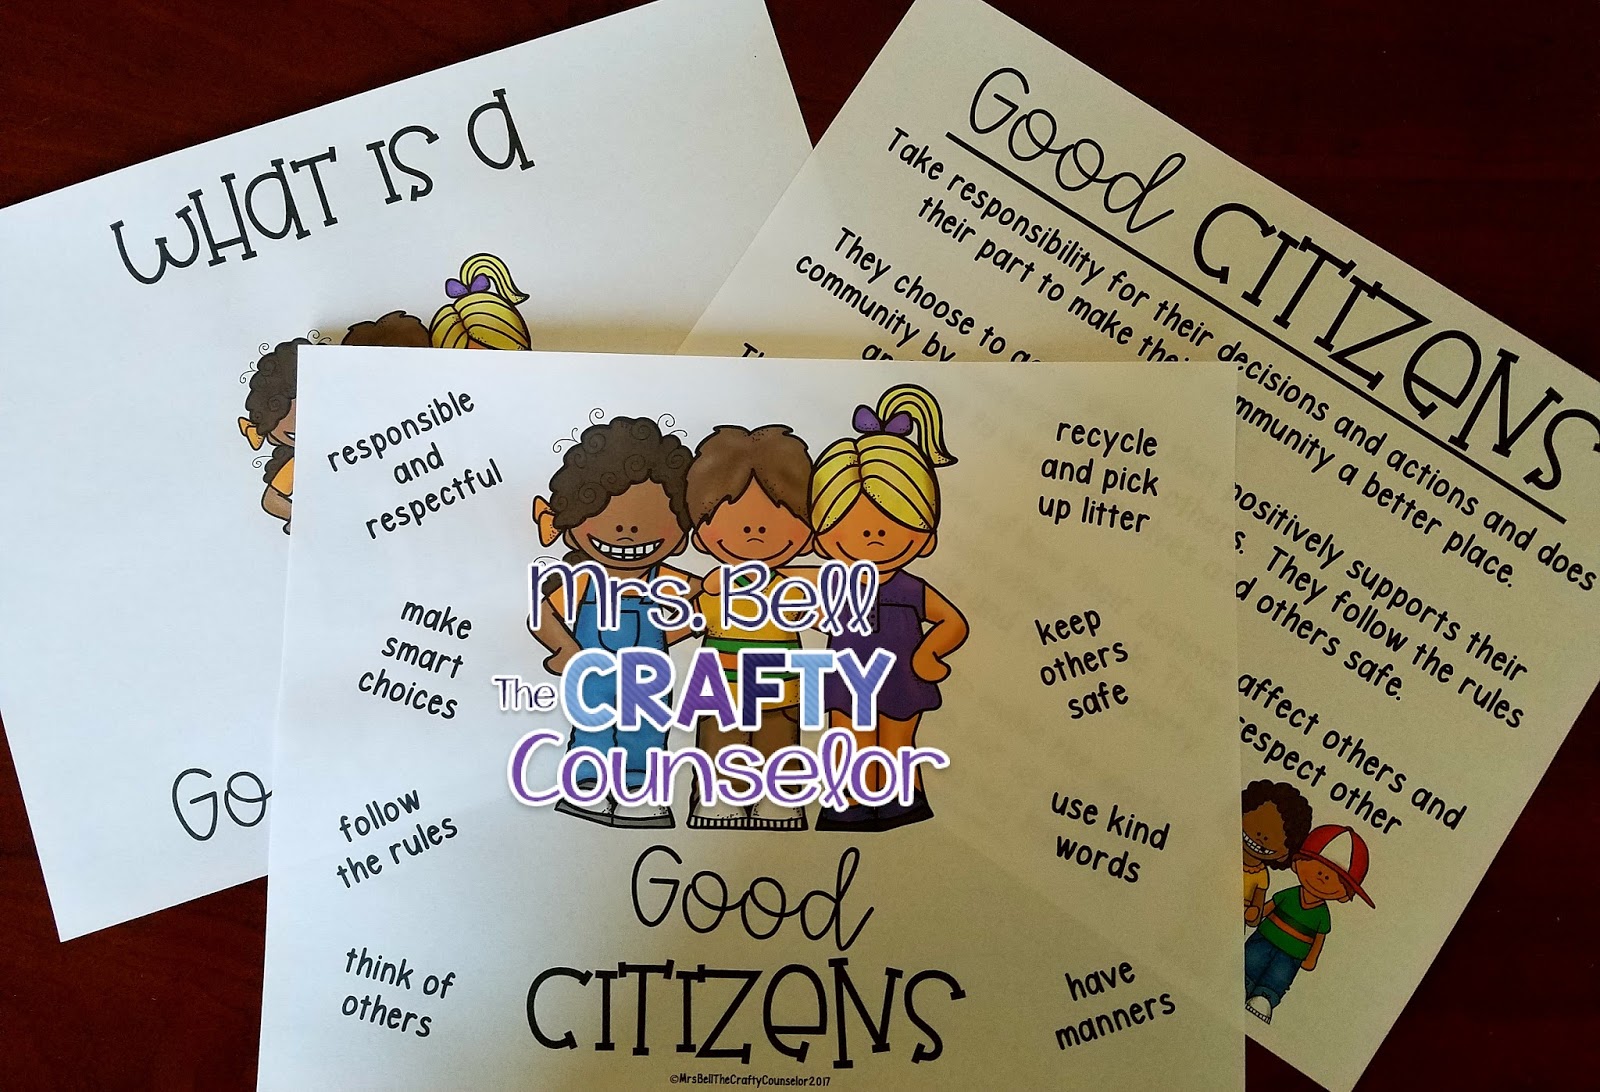 Good Citizens - Mrs. Bell The Crafty Counselor